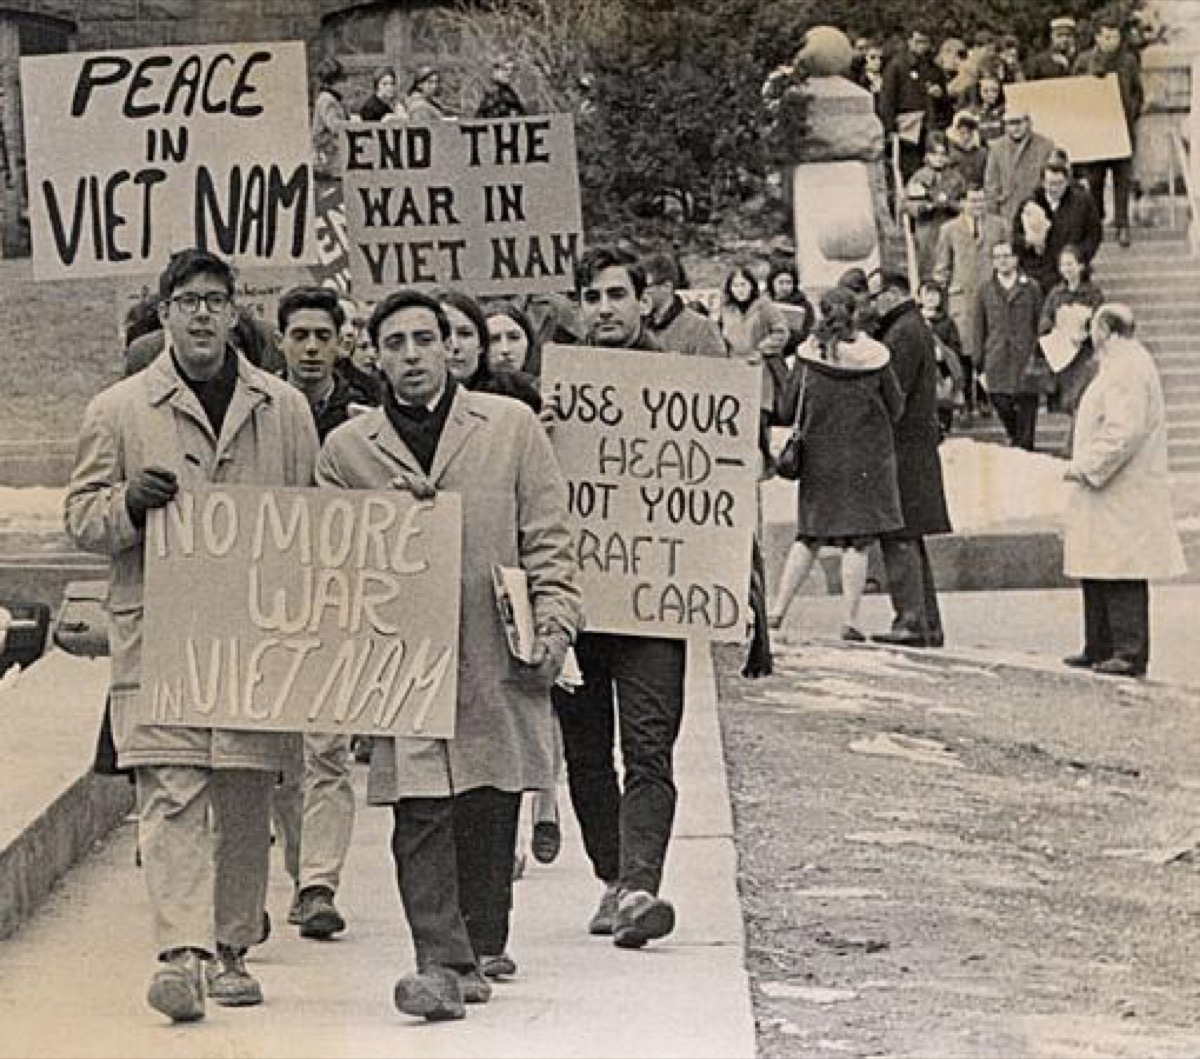 Student Vietnam War Protests {Dating 50 Years Ago}